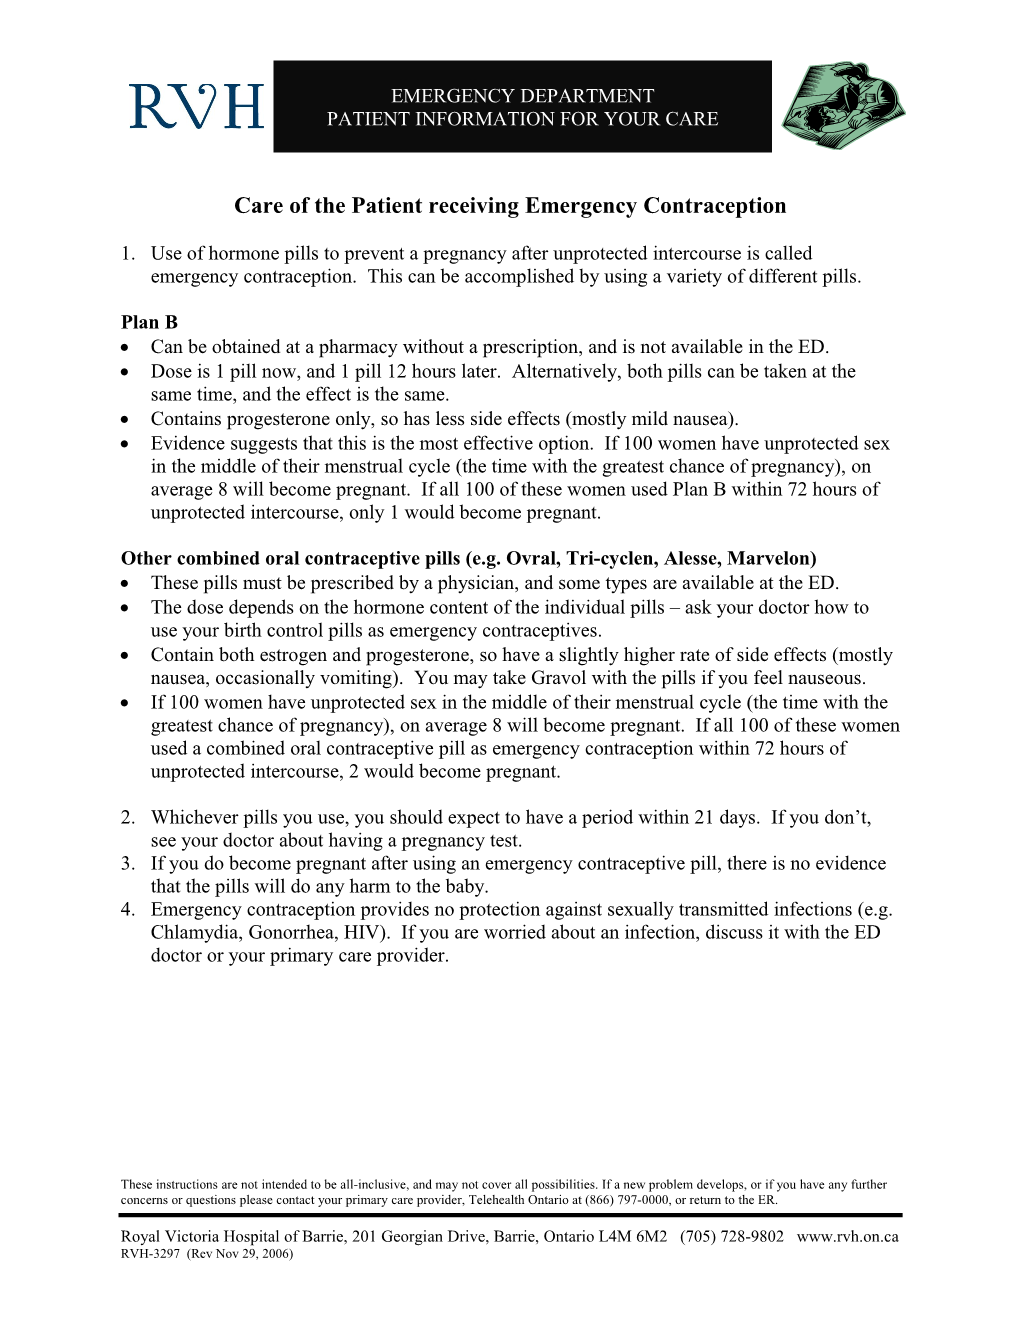 Care of the Patient Receiving Emergency Contraception